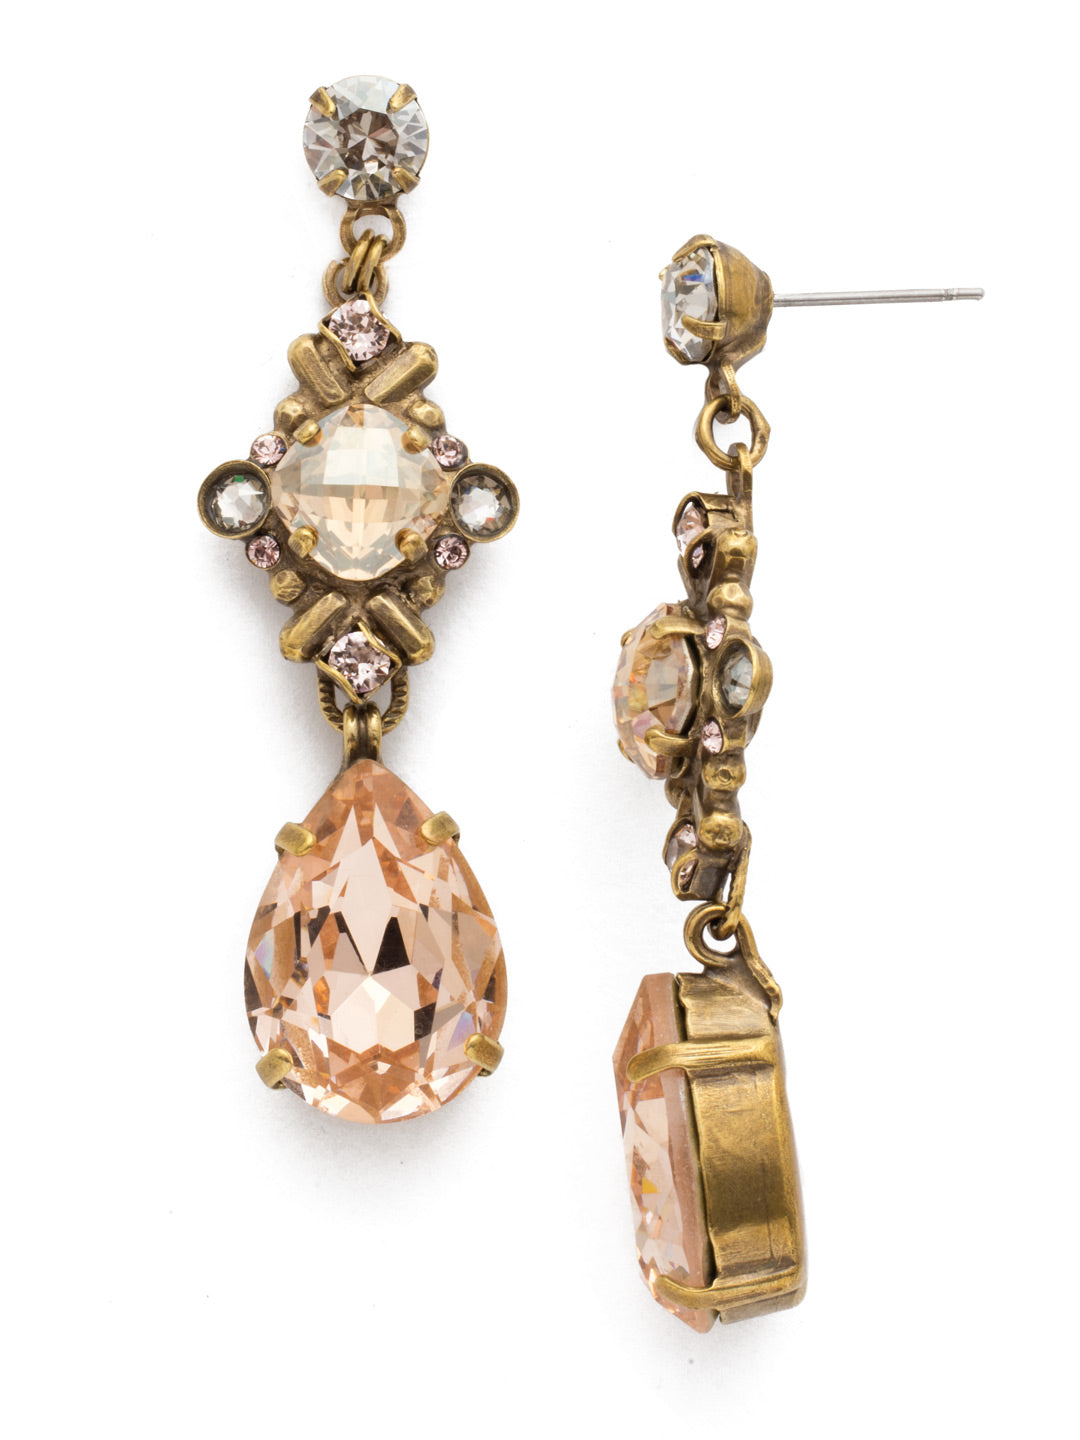 Acca Dangle Earrings - EDX26AGSRO - A three-layer dangling earring with a stud post, a pear shaped gem at the end, and an intricate design in the middle with a cushion cut antique stone in a crystal encrusted X design!